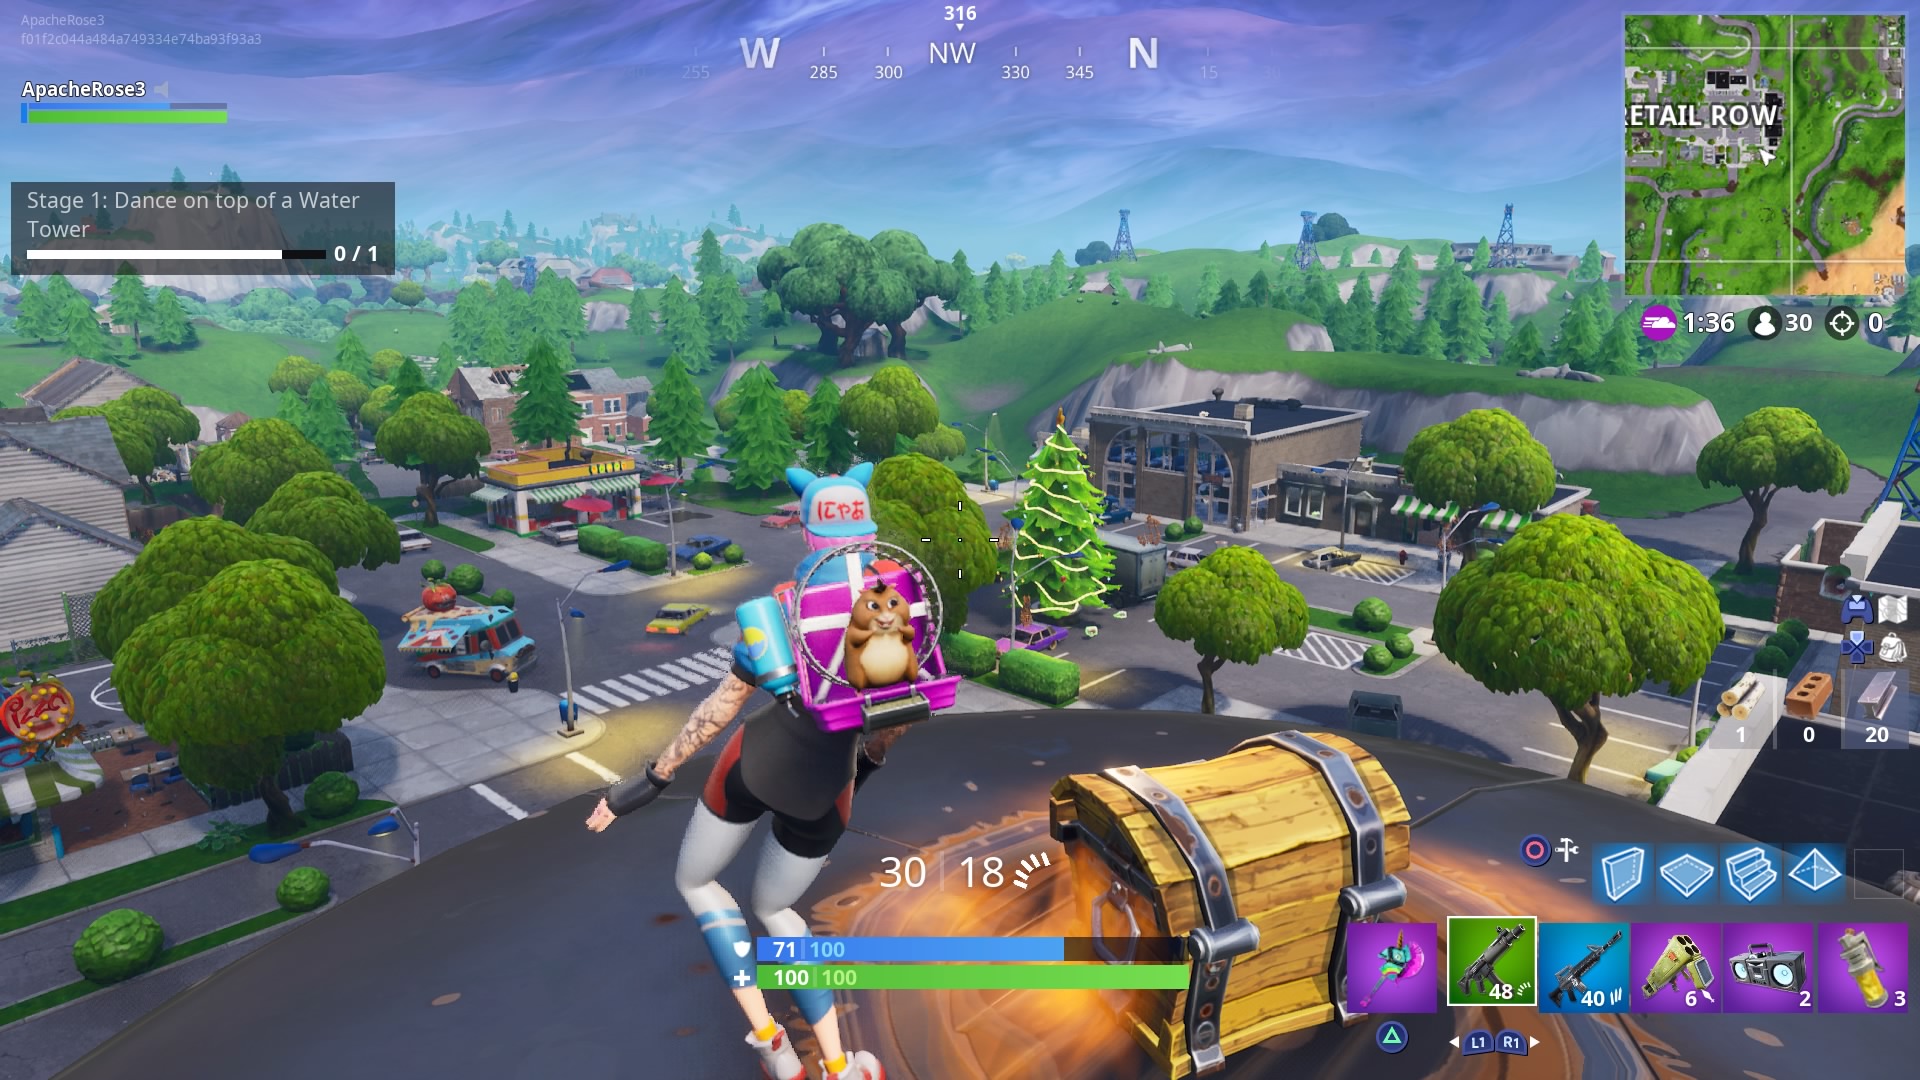 where to dance on top of a water tower ranger tower and air traffic control tower in fortnite season 7 week 5 challenges gamesradar - fortnite ranger tower location map